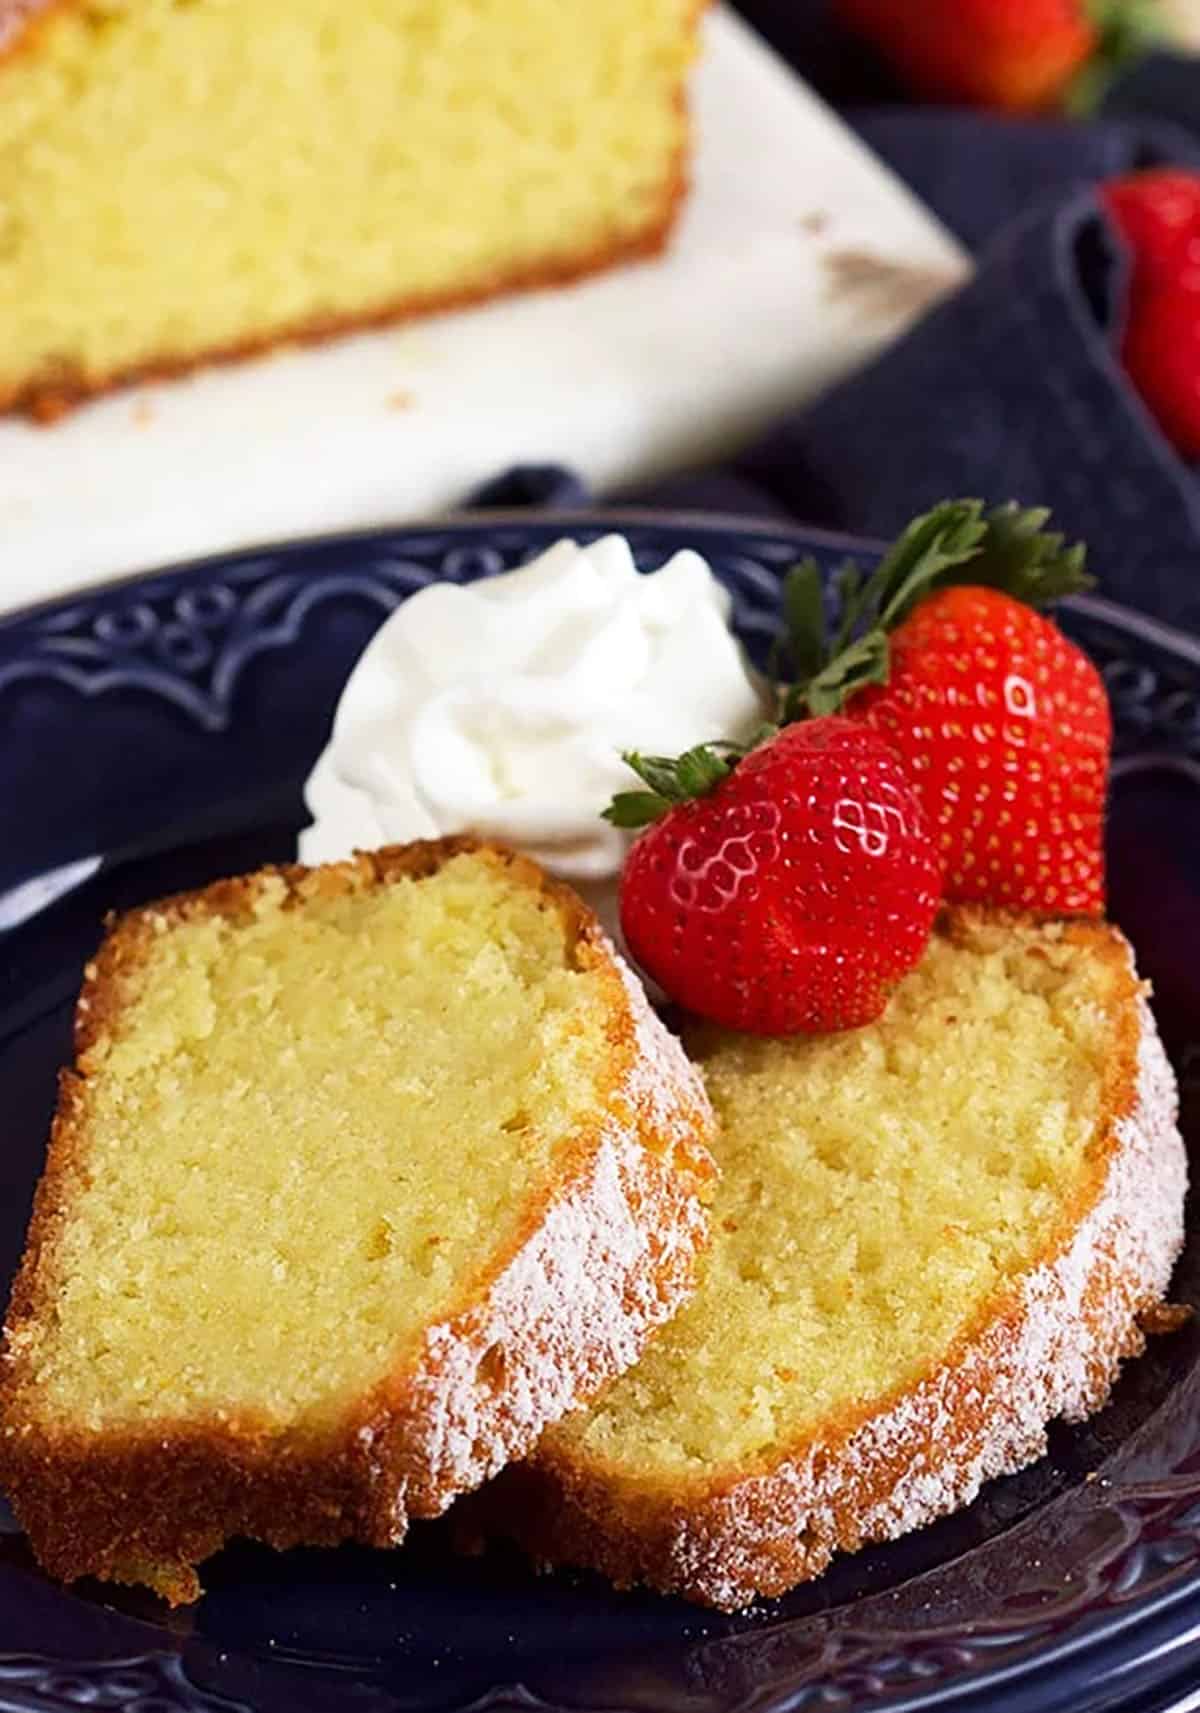 two slices of pound cake on a blue plate with whipped cream